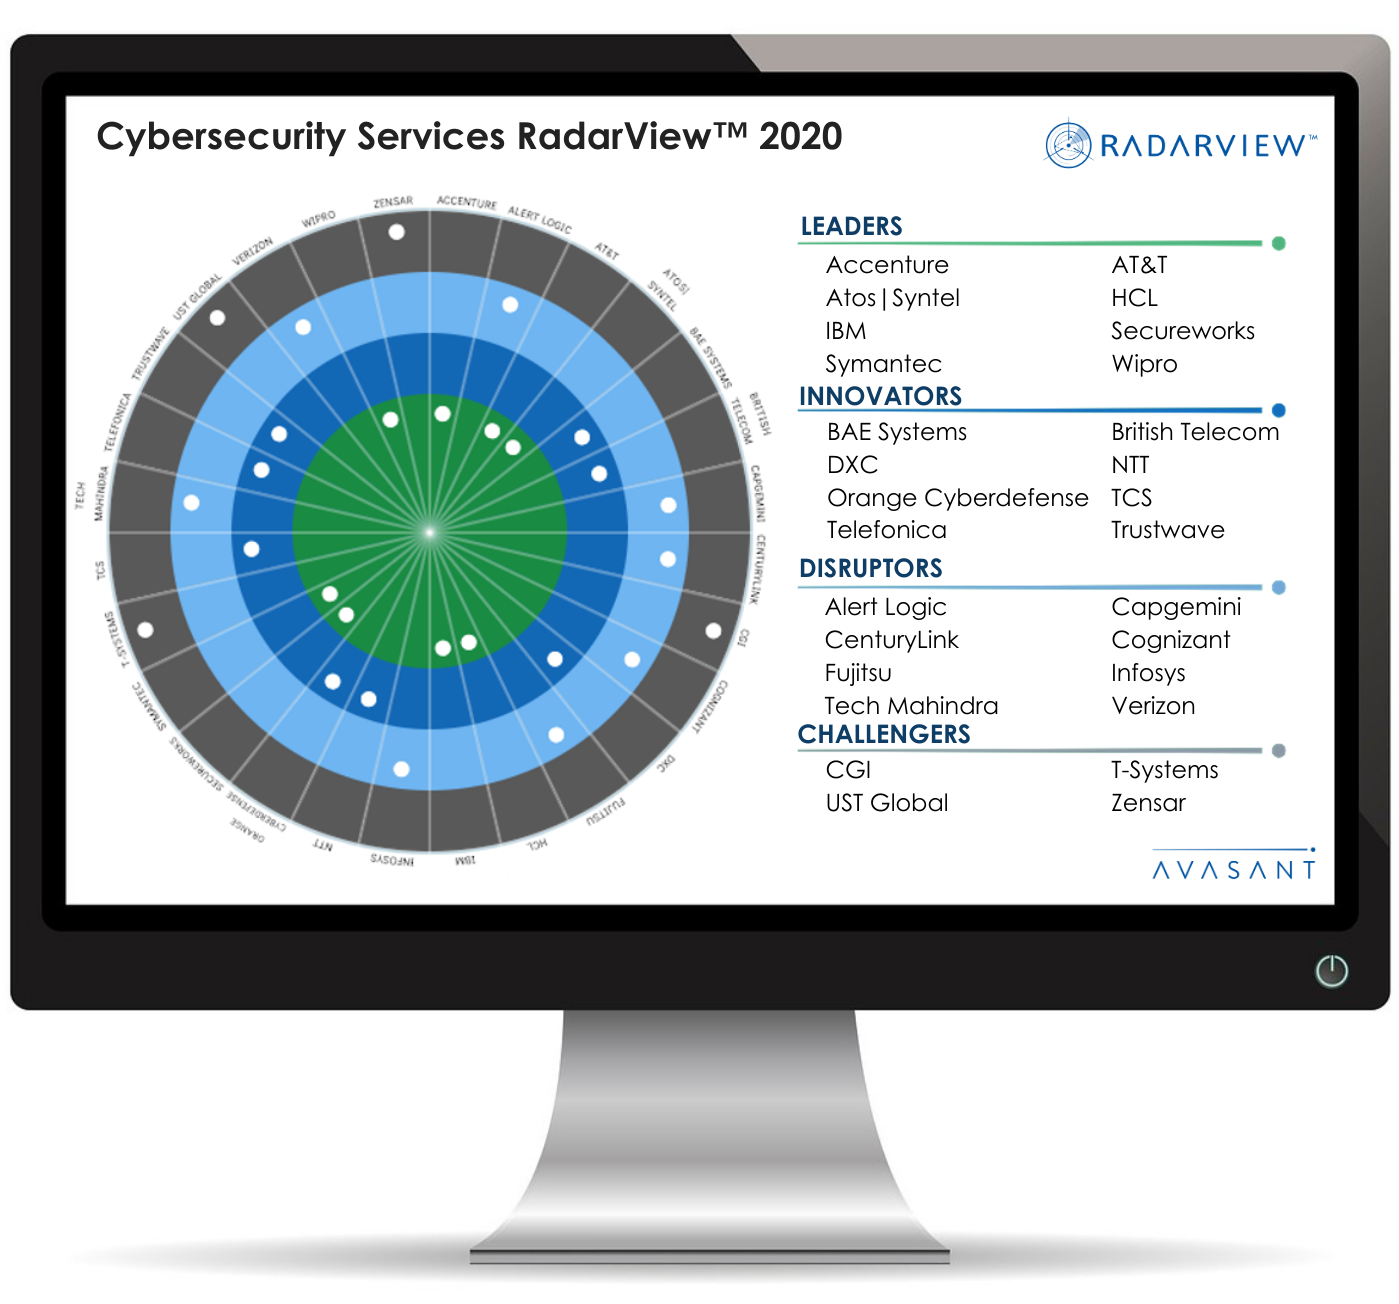 Cybersecurity RV 1 1 - Cybersecurity Services RadarView™ 2020 - IBM